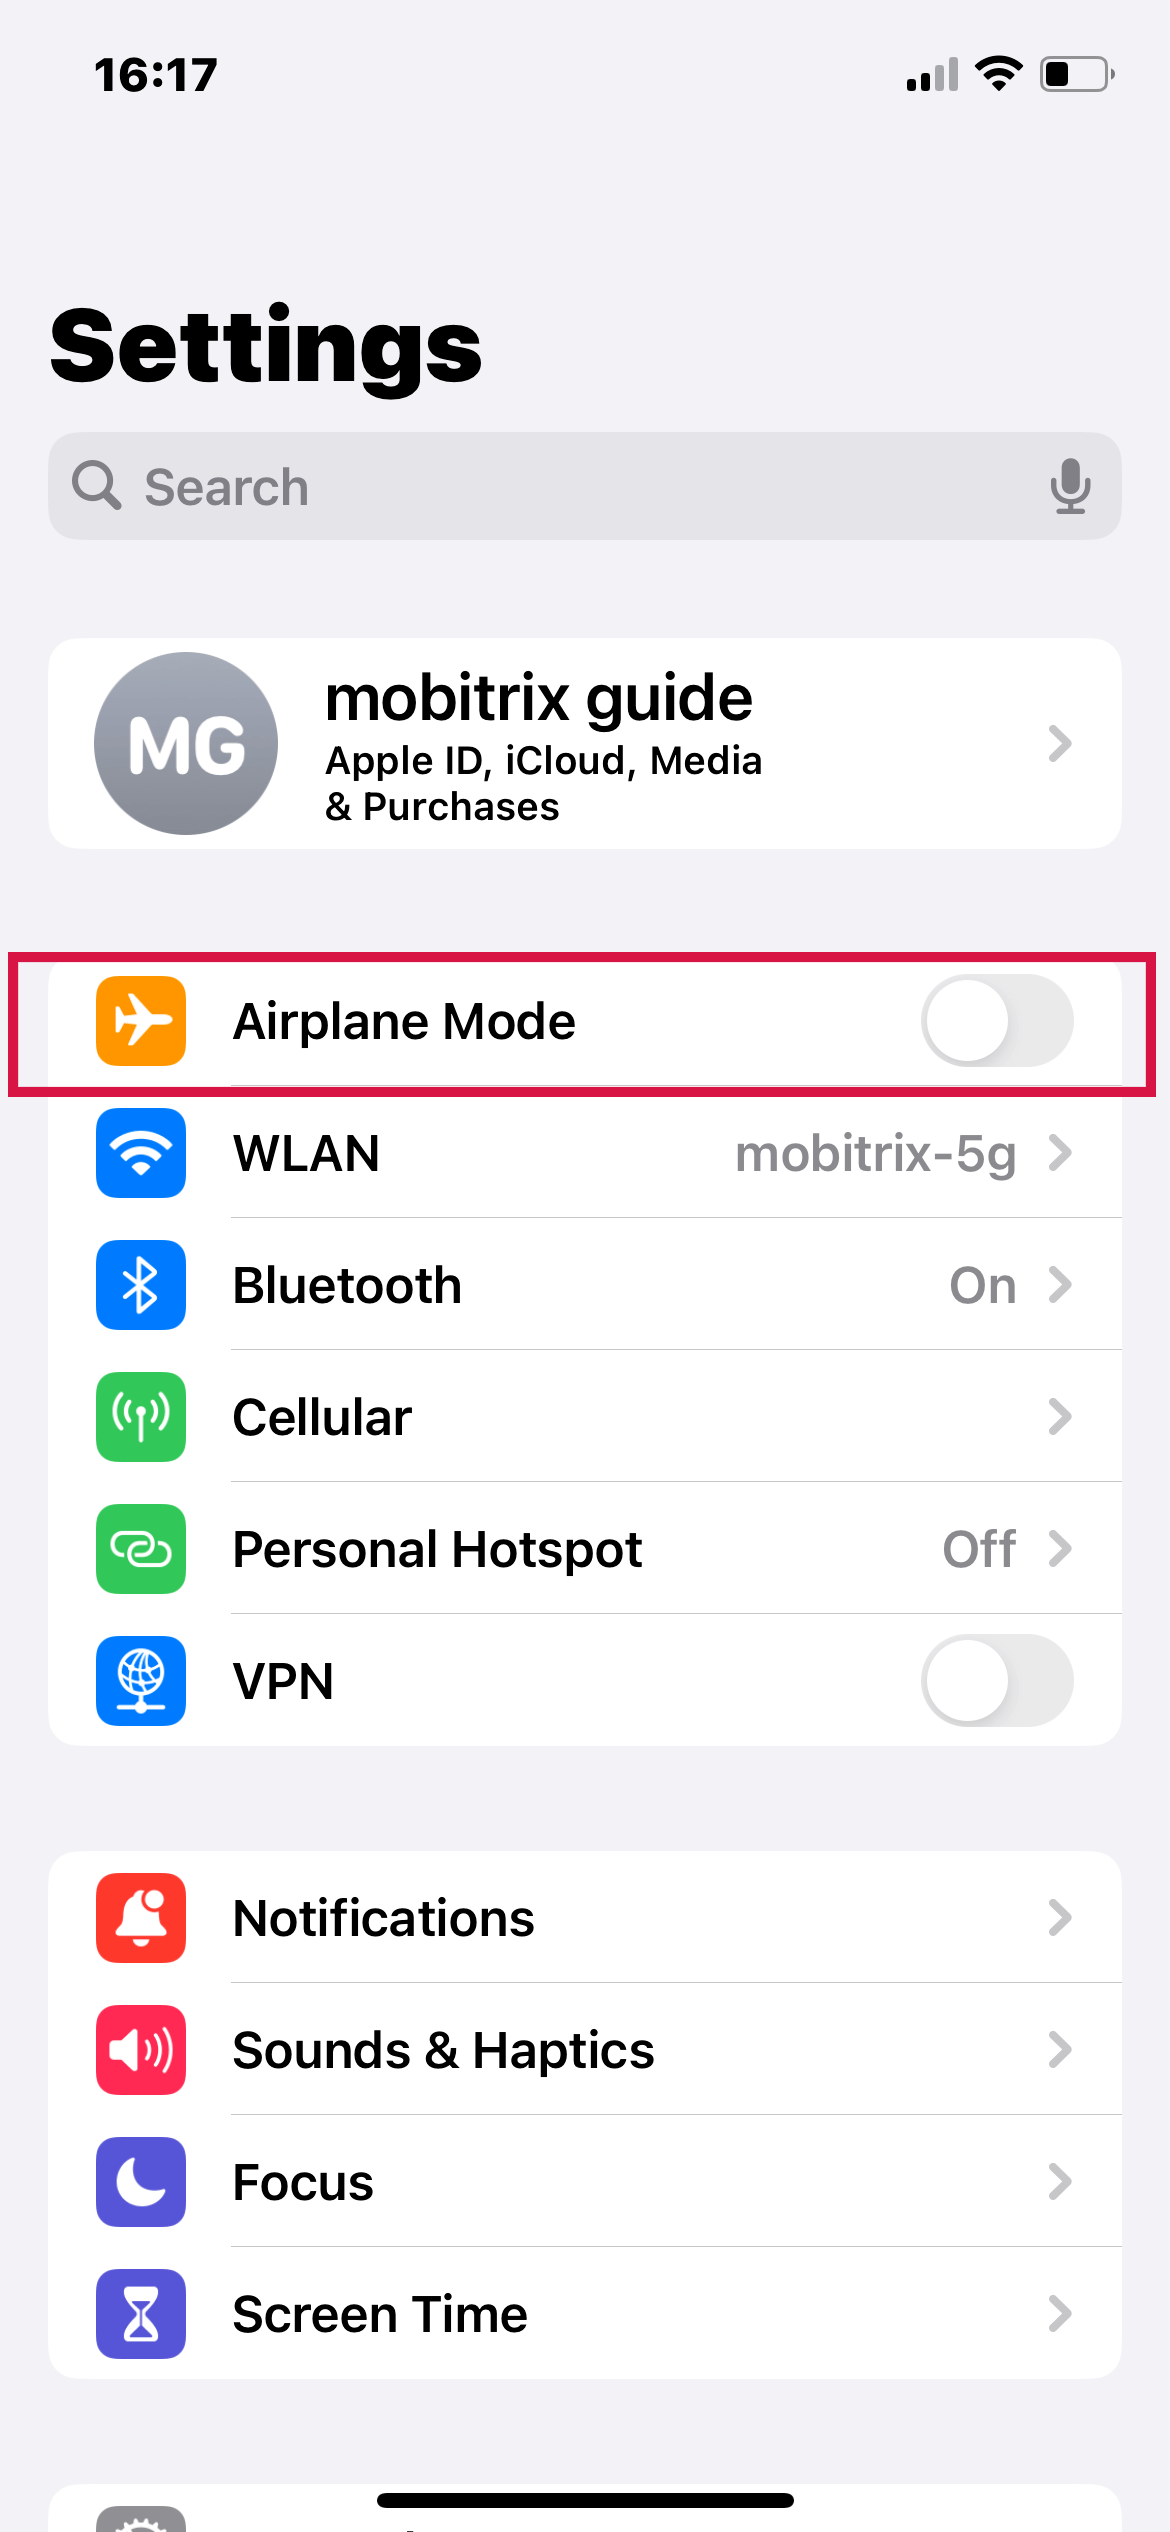 Toggle Airplane Mode On or Off